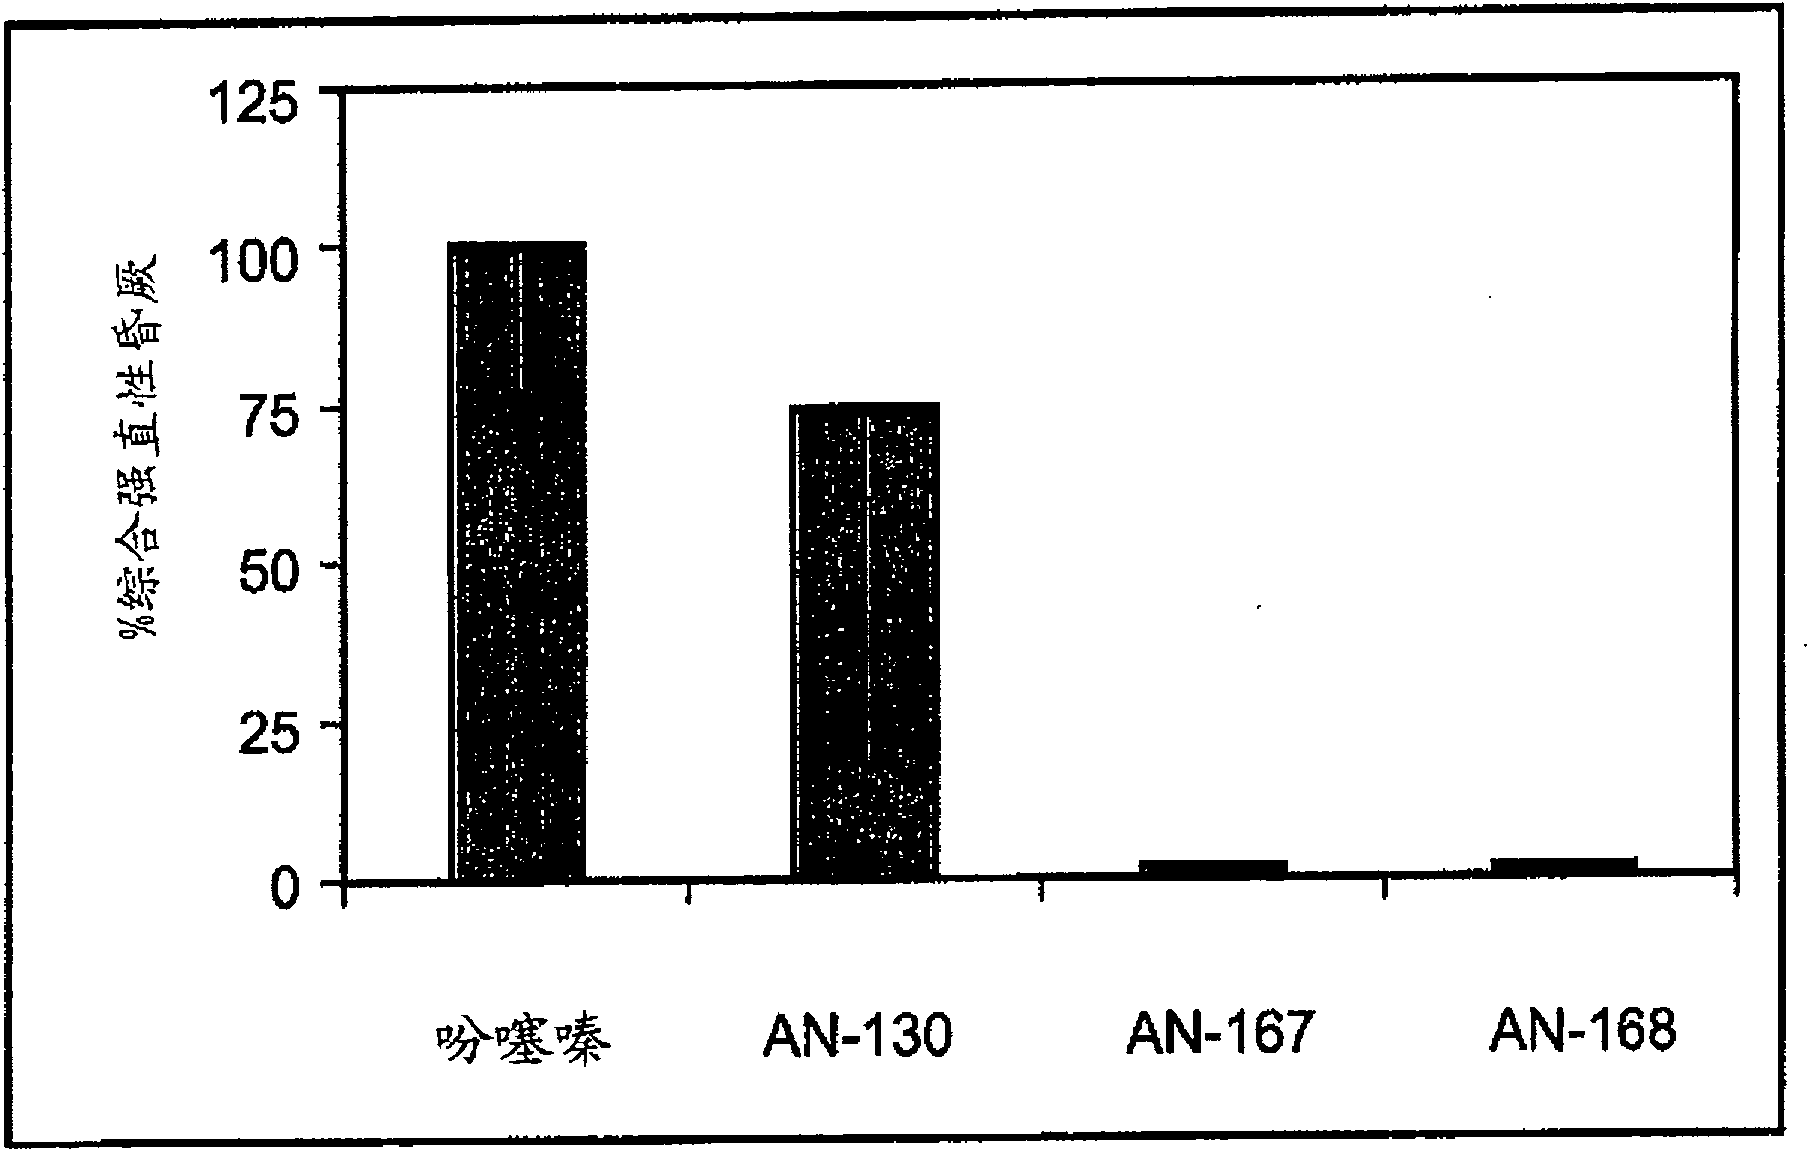 Conjugated anti-psychotic drugs and uses thereof